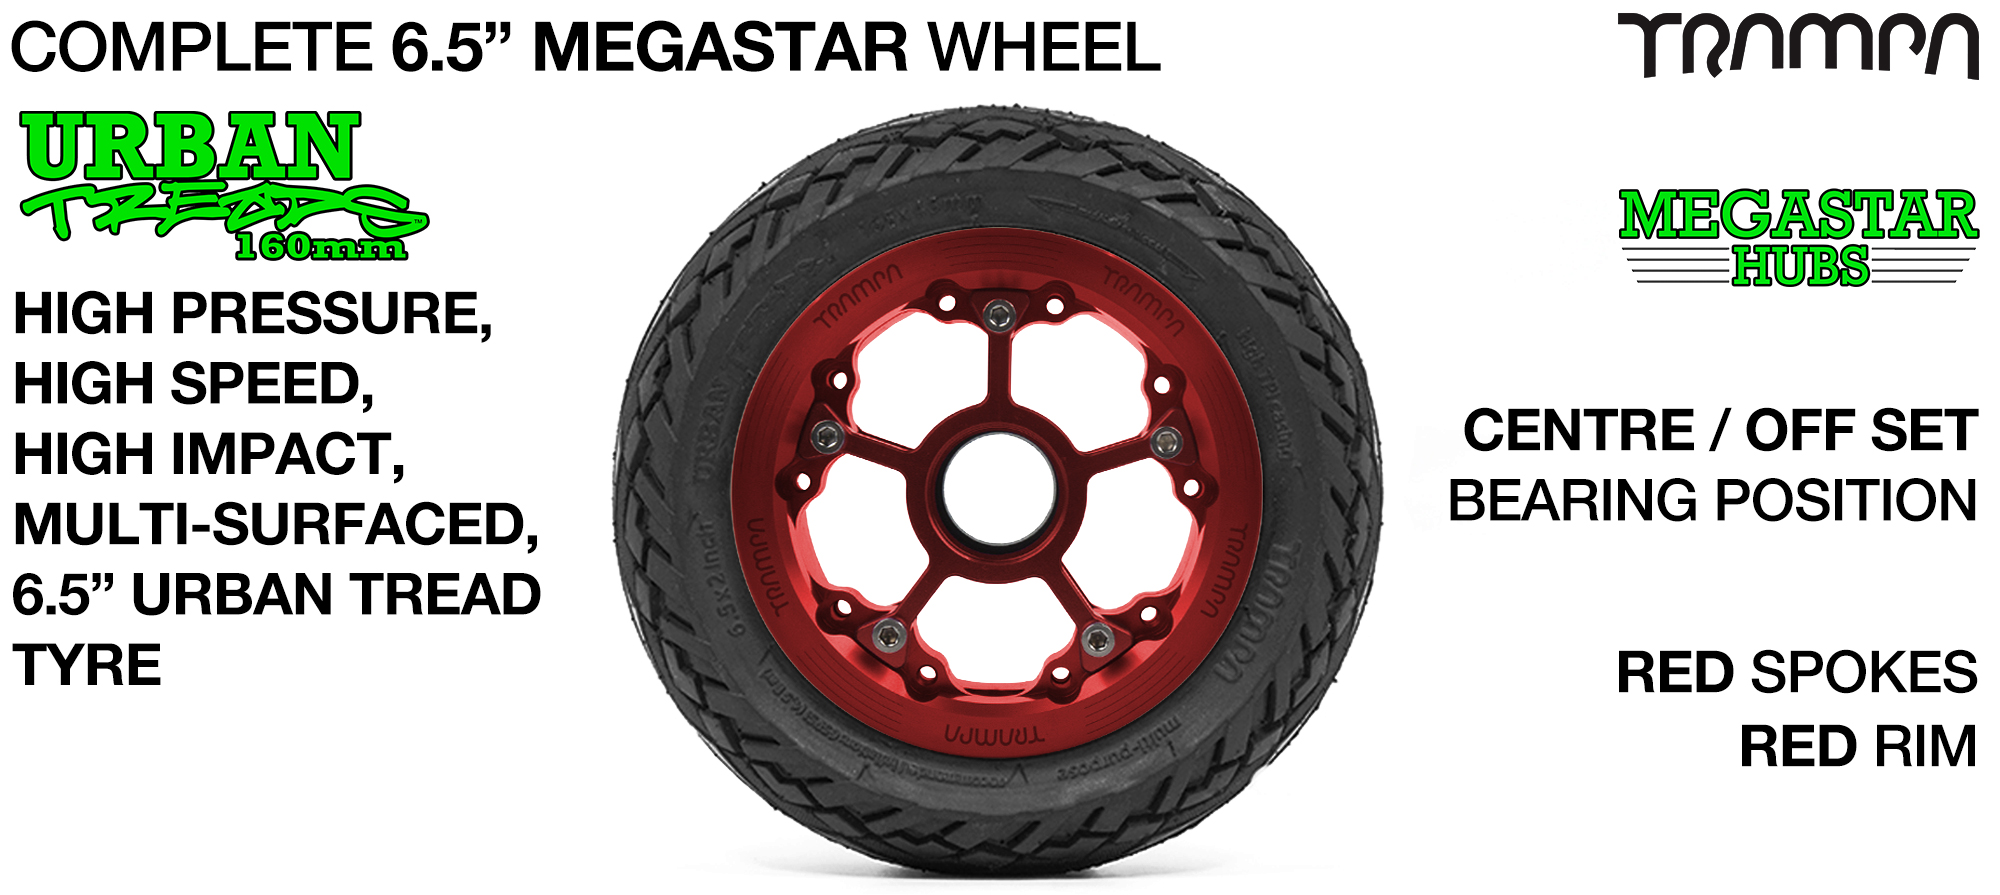 CENTER-SET MEGASTAR 8 Hub with RED Rims & RED Spokes with the amazing Low Profile 6.5 Inch URBAN Treads Tyres